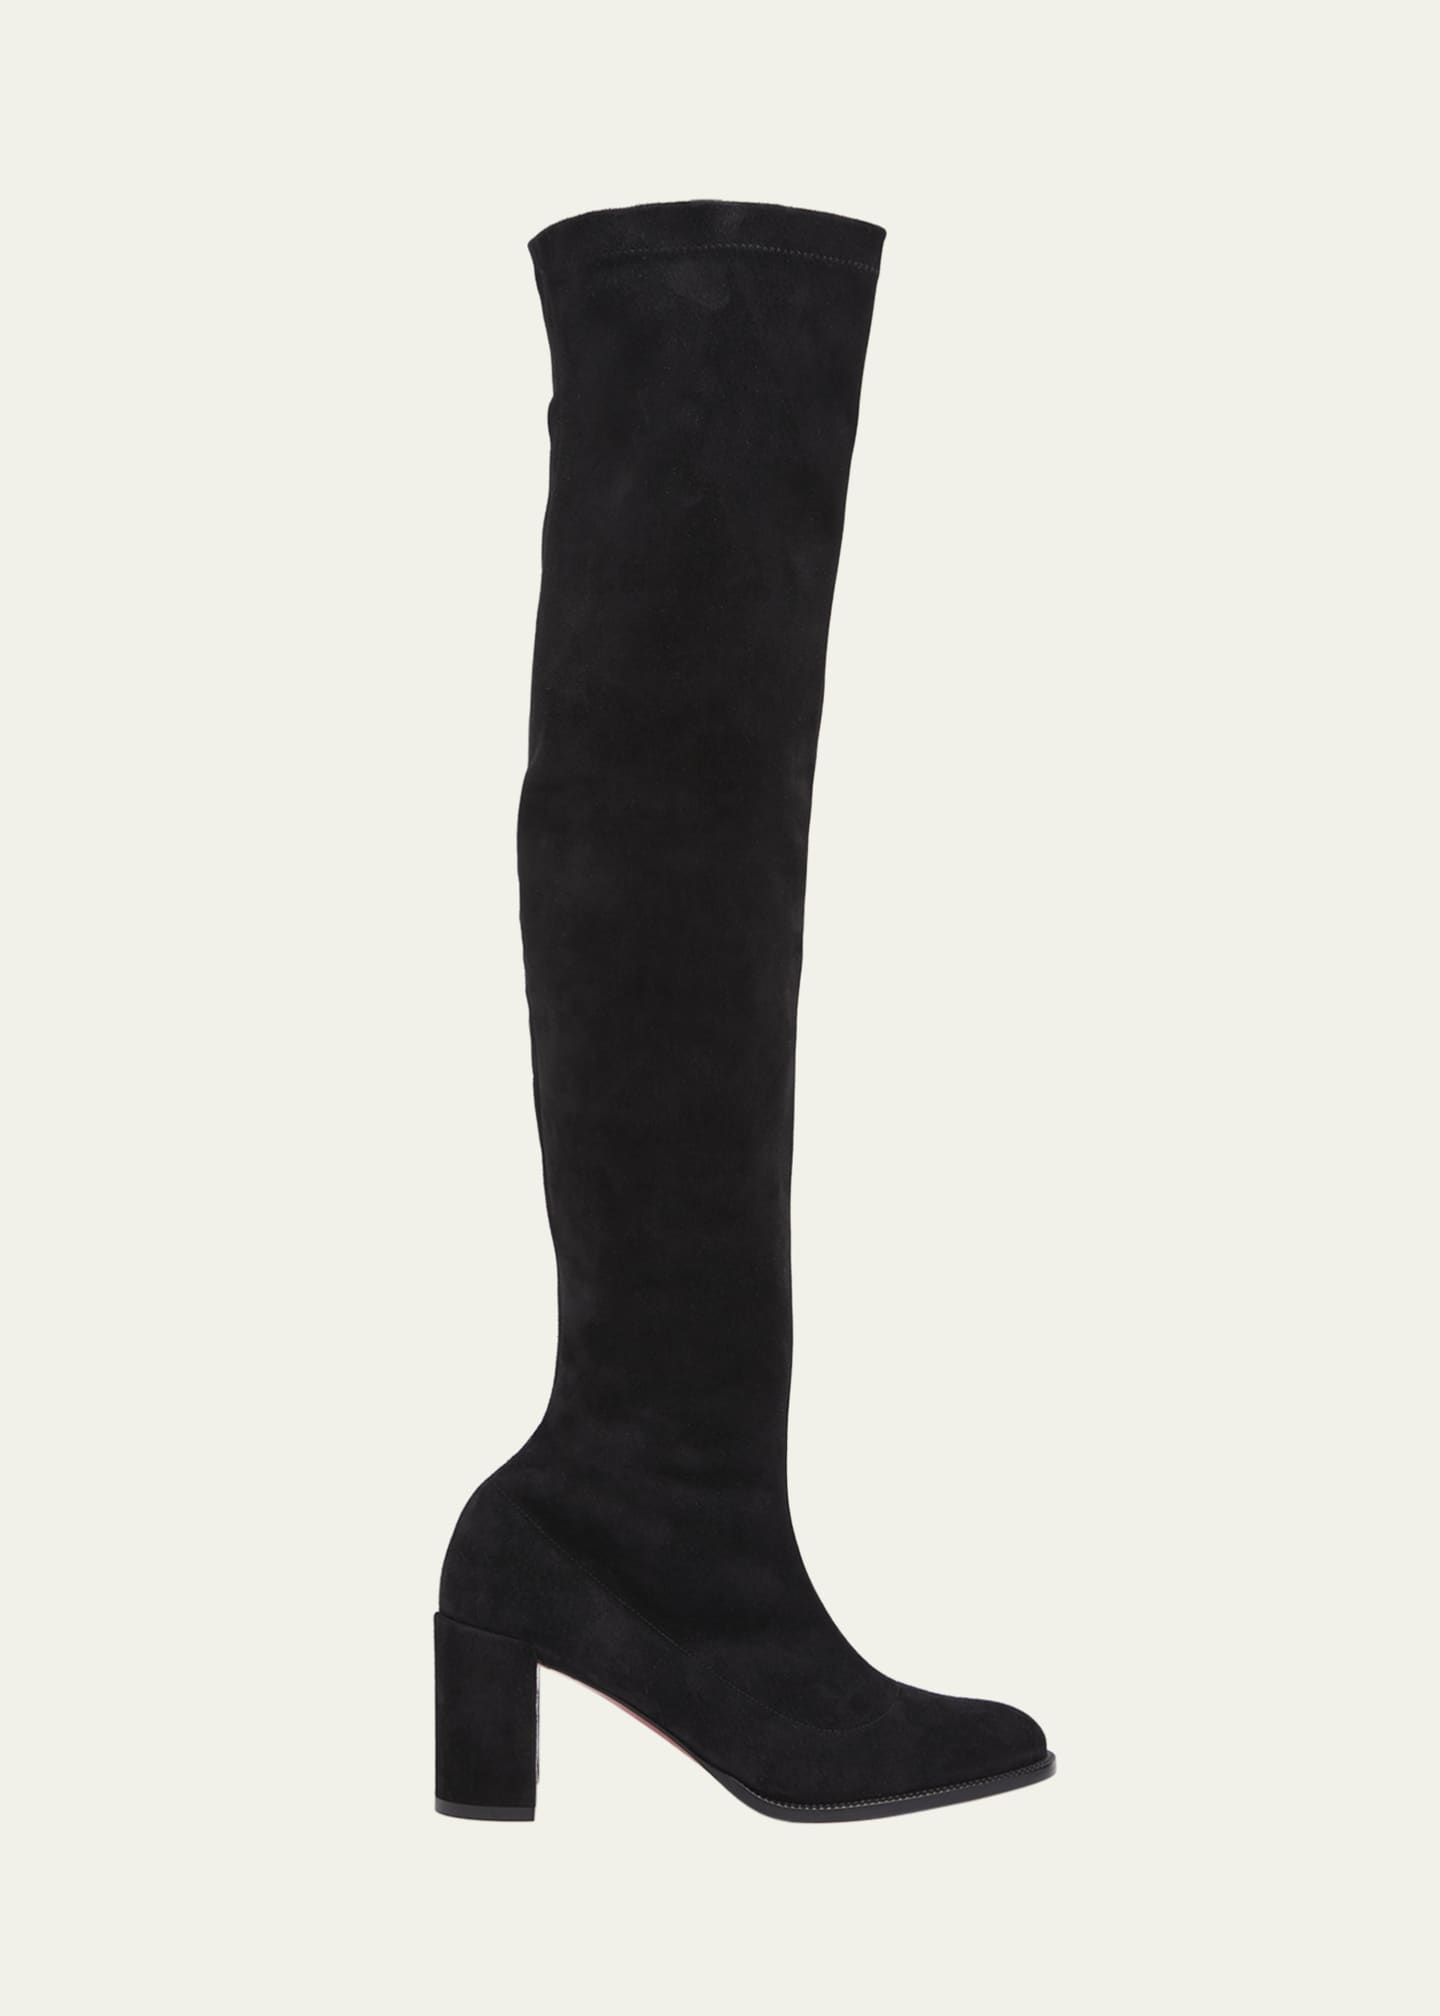 Christian Louboutin Adoxa Stretch Suede Red-Sole Over-The-Knee Boots ...